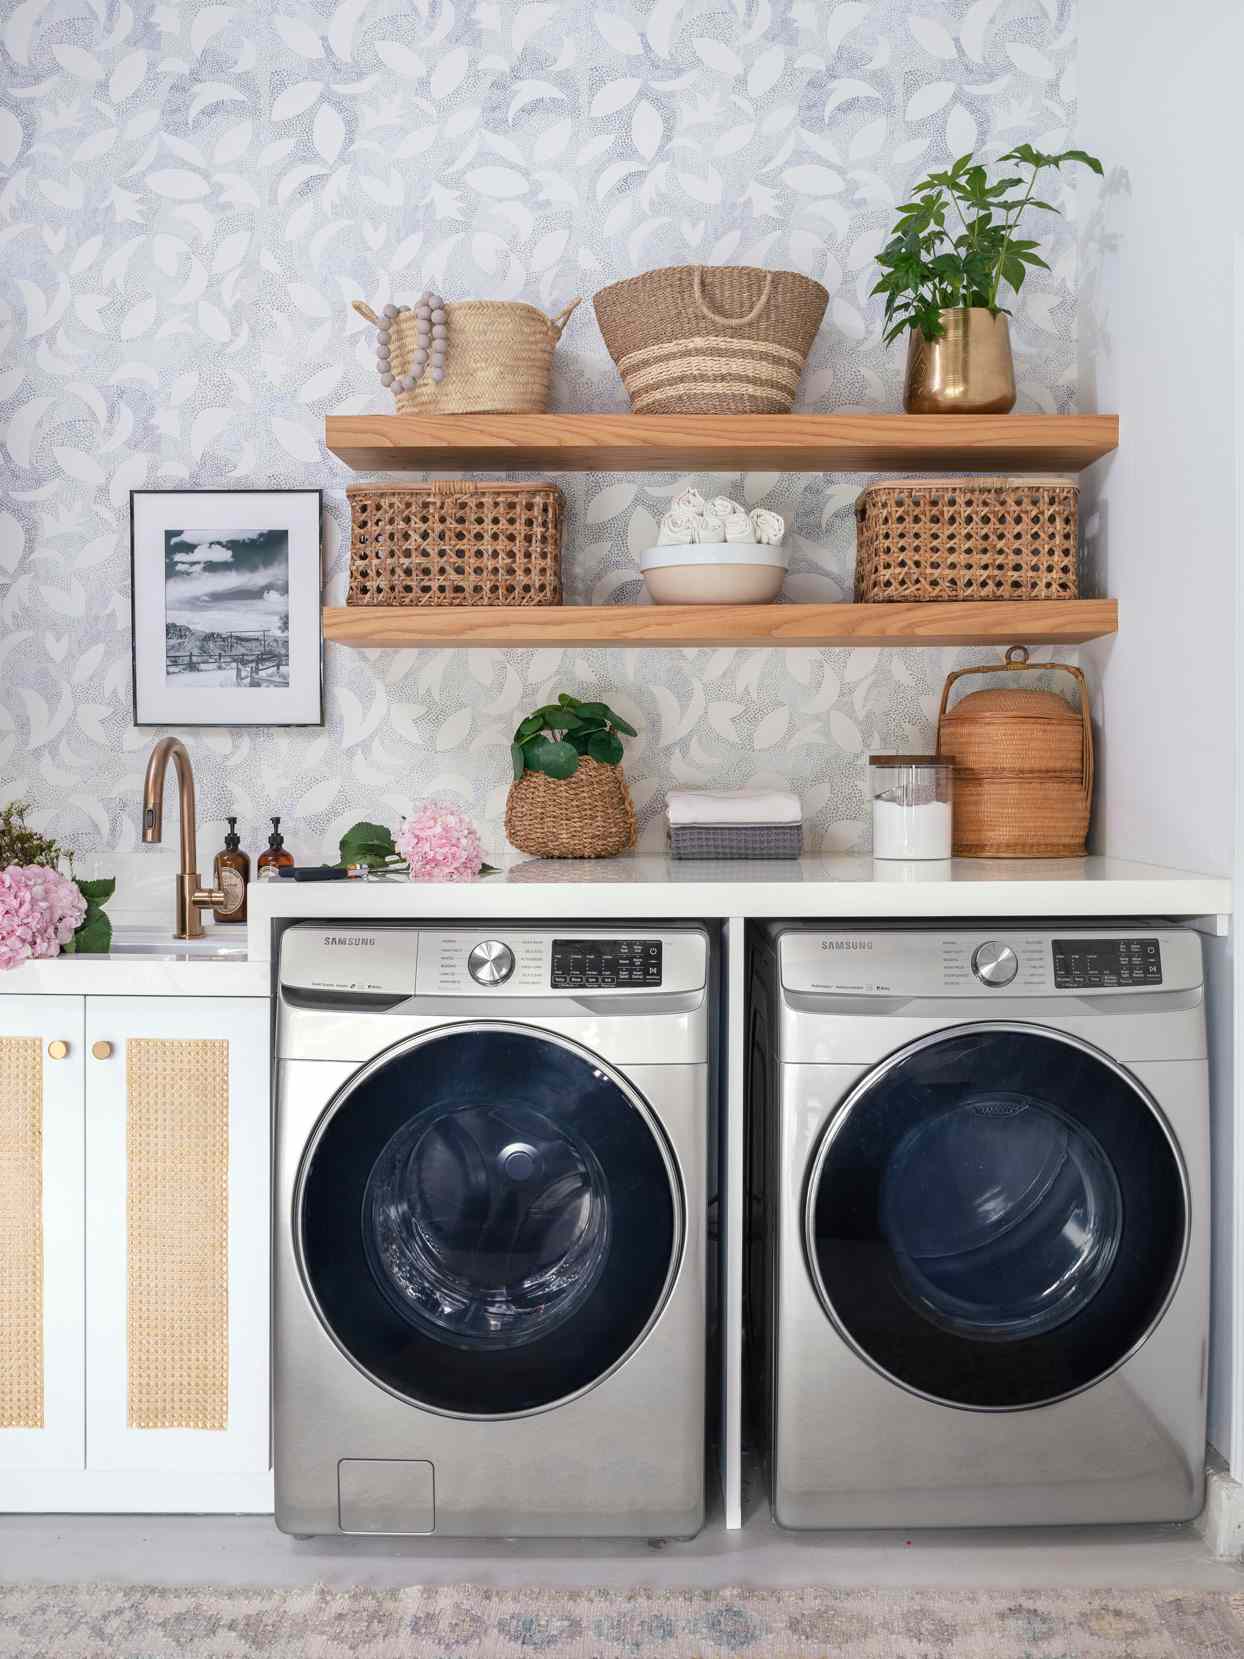 laundry room wallpaper open shelves cabinets caning baskets